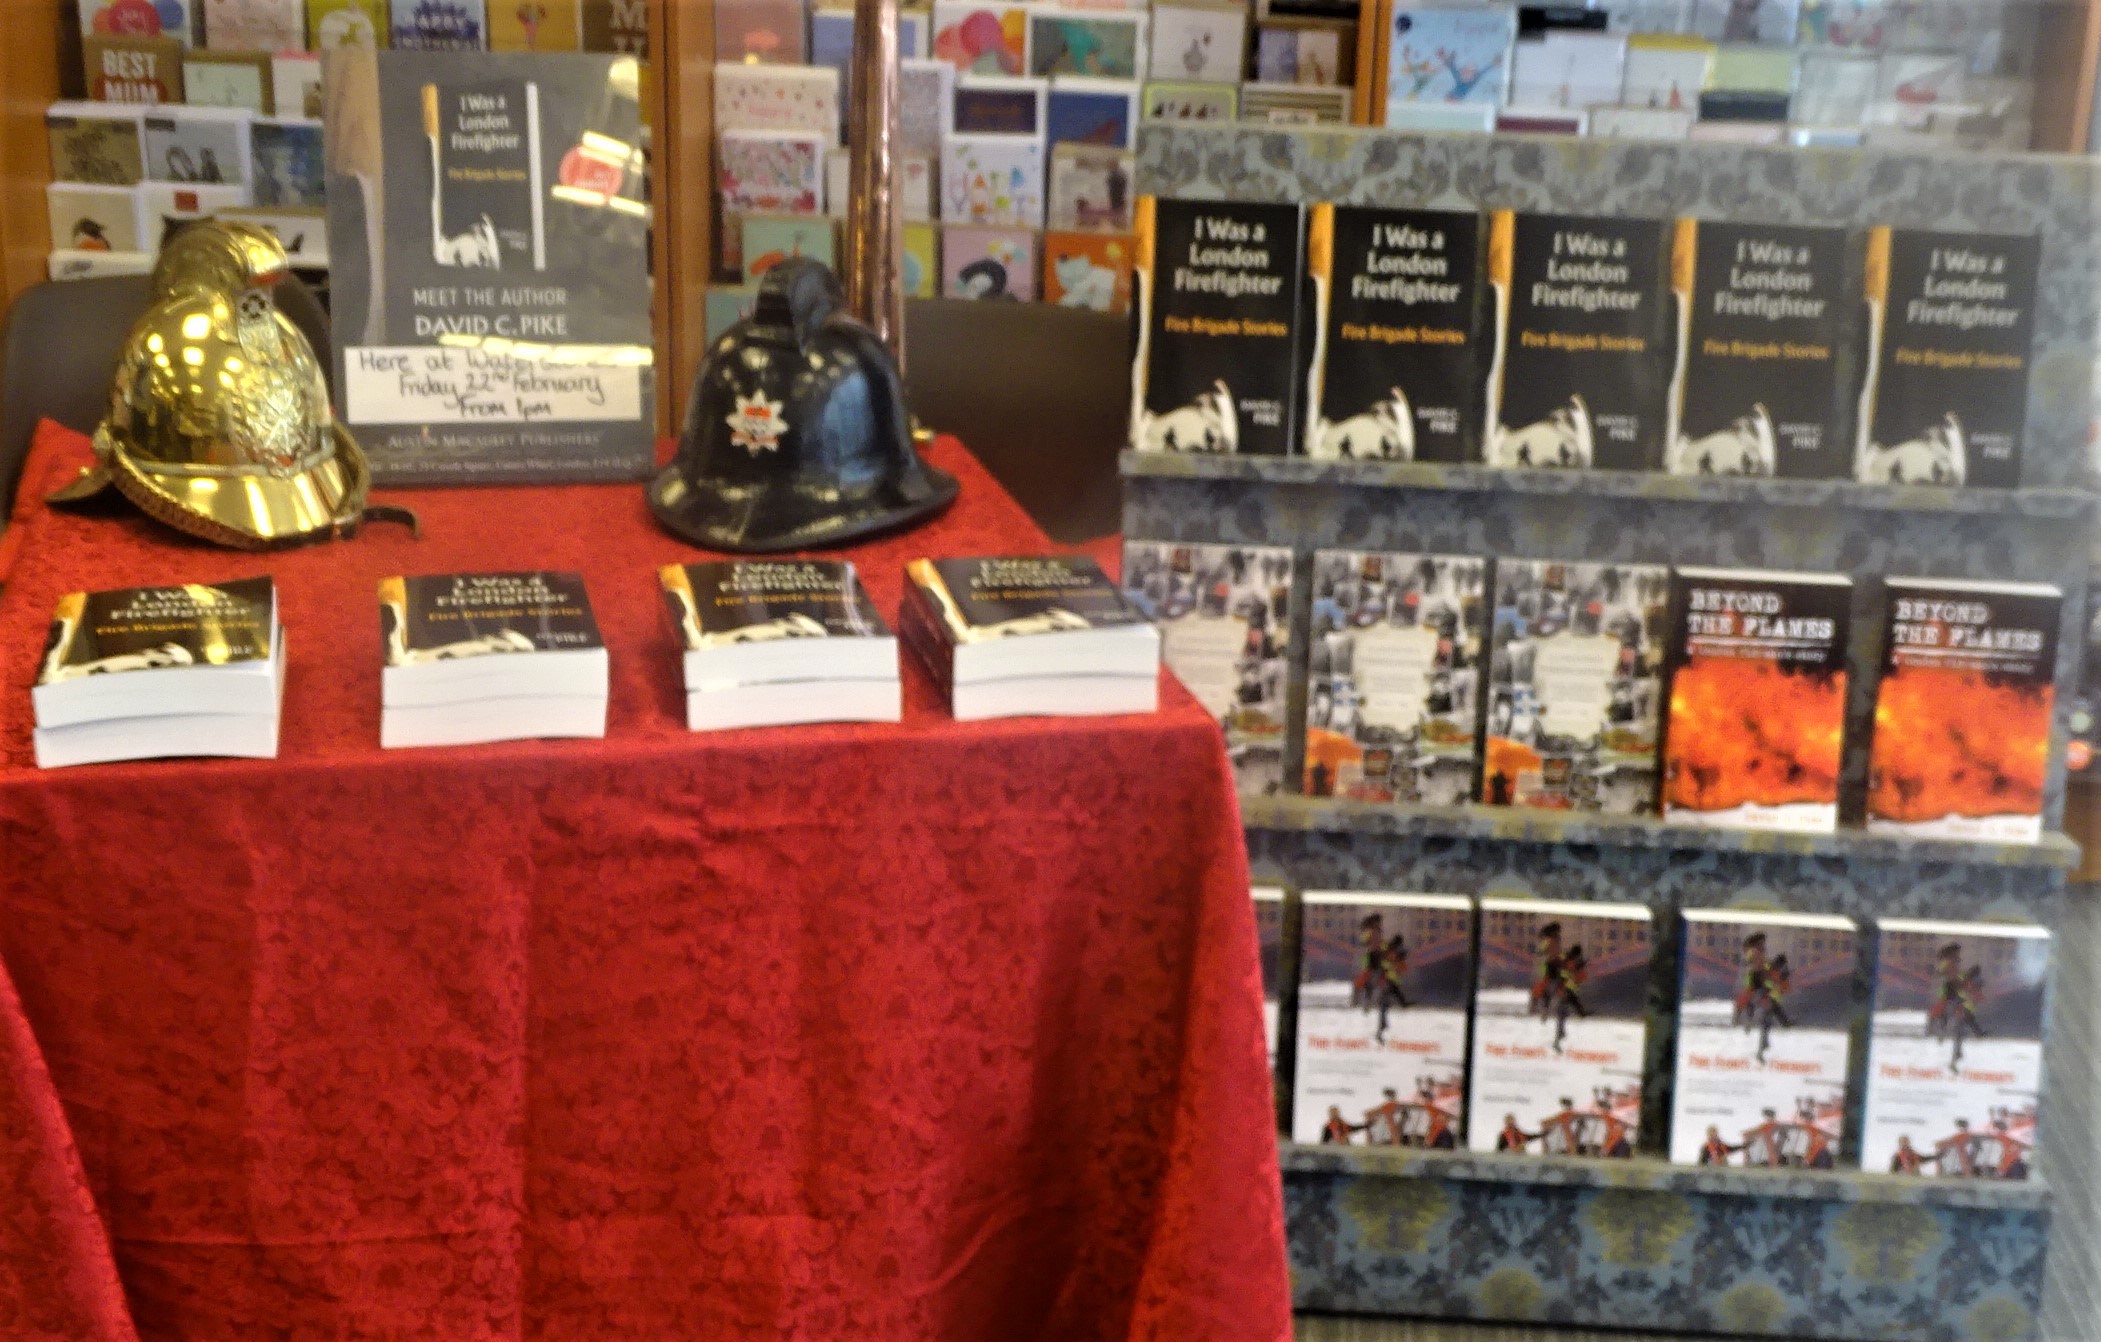 David C. Pike, the author of ‘I Was a London Firefighter’ attended a Book Signing Event